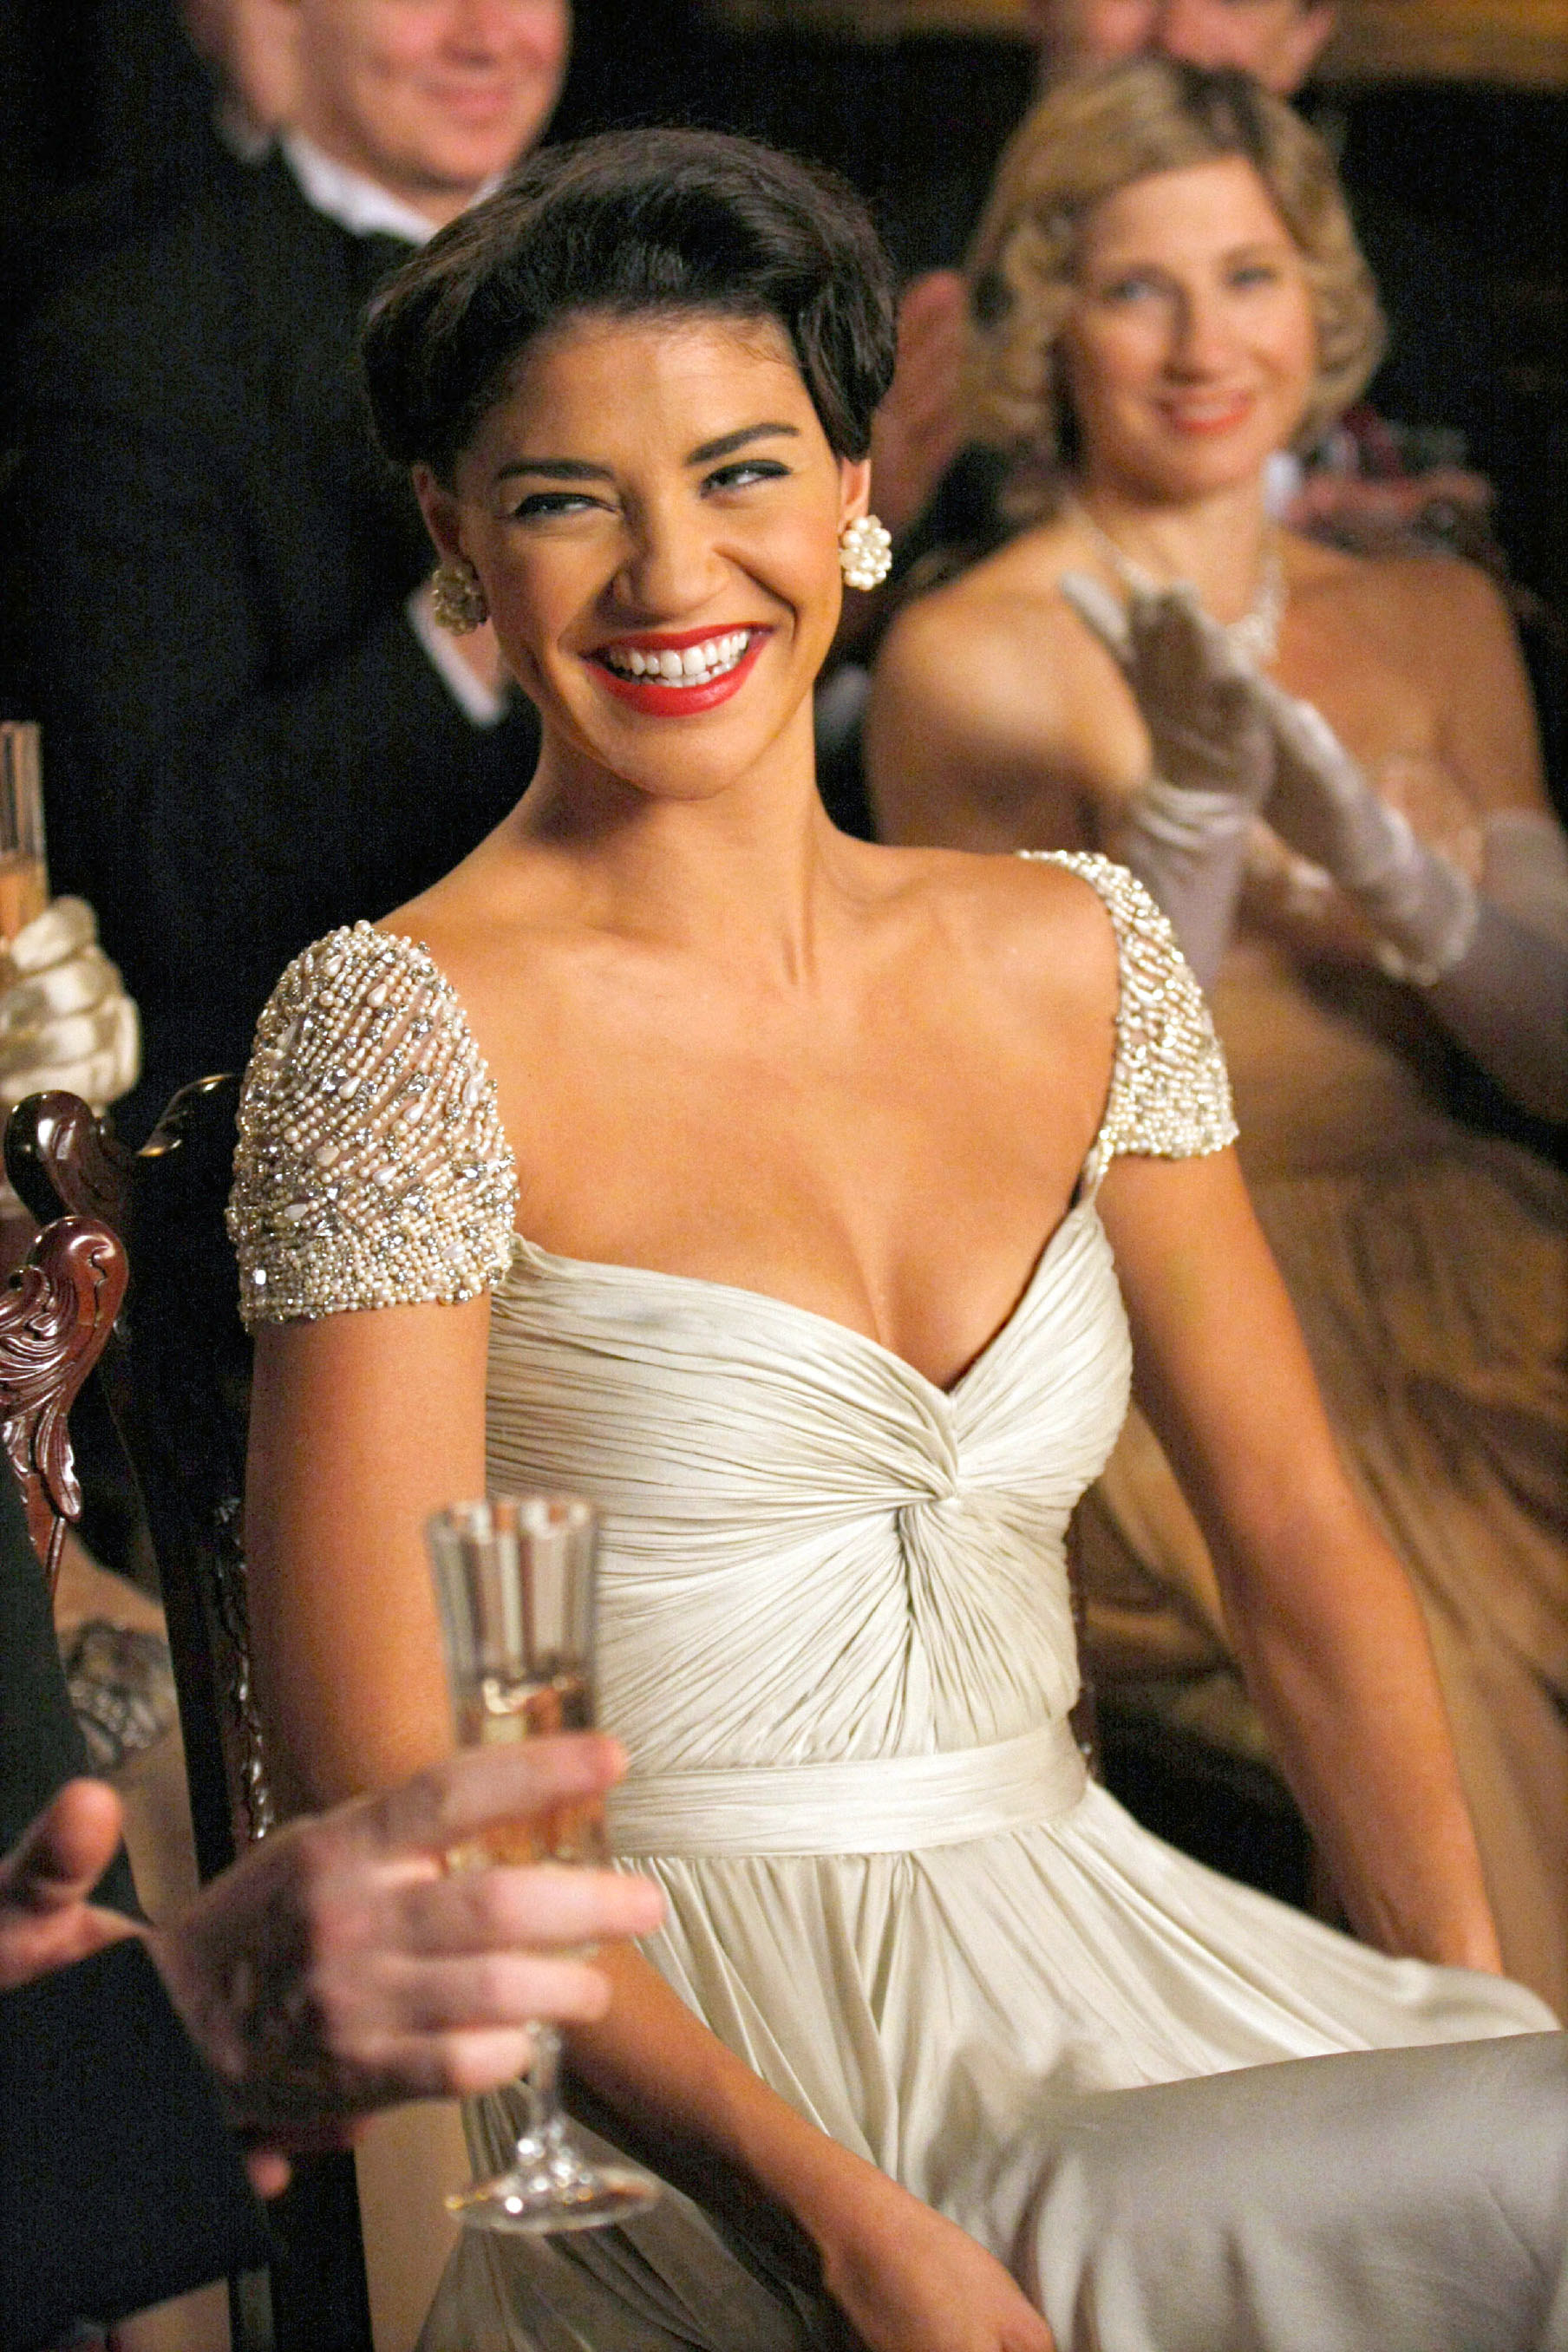 Vanessa smiling at a formal event while wearing a beaded and satin dress